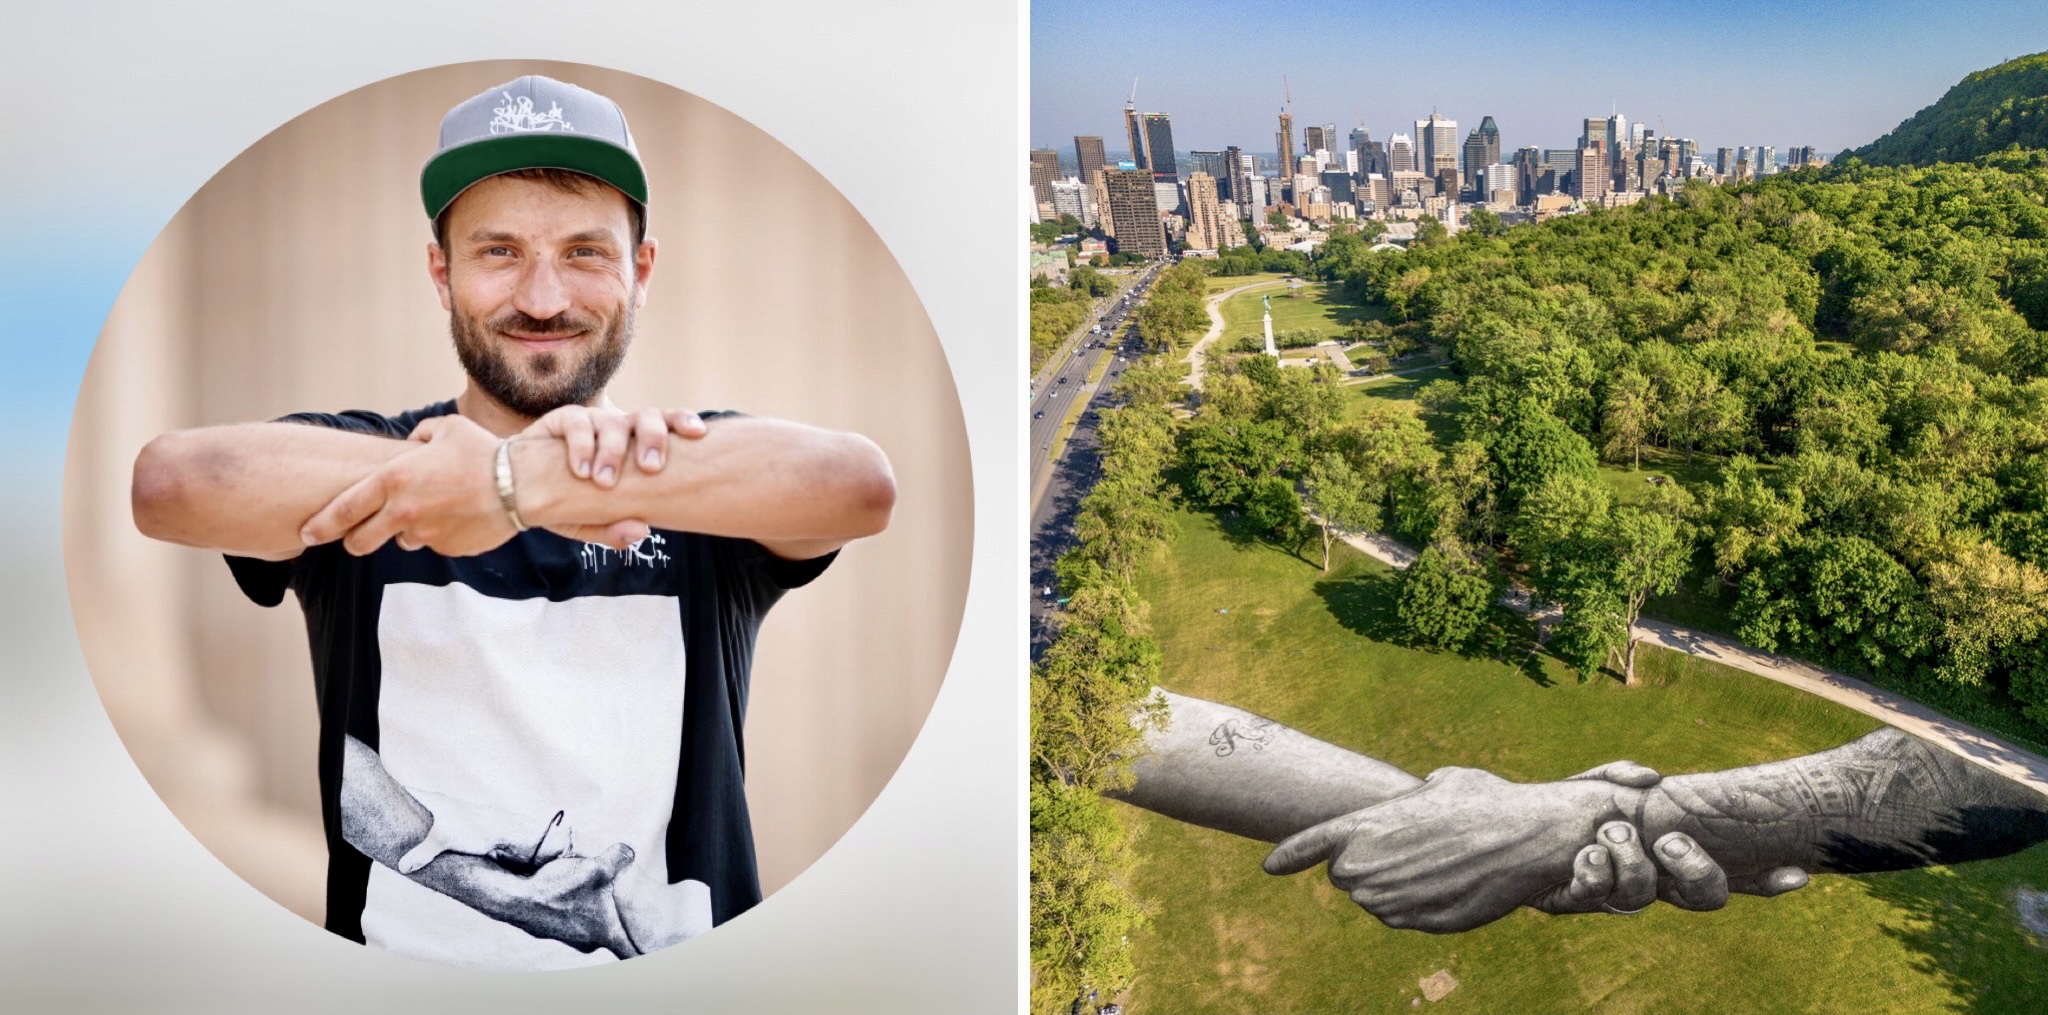 Massive new artwork on Mount Royal: “It is together that humanity can meet its challenges”